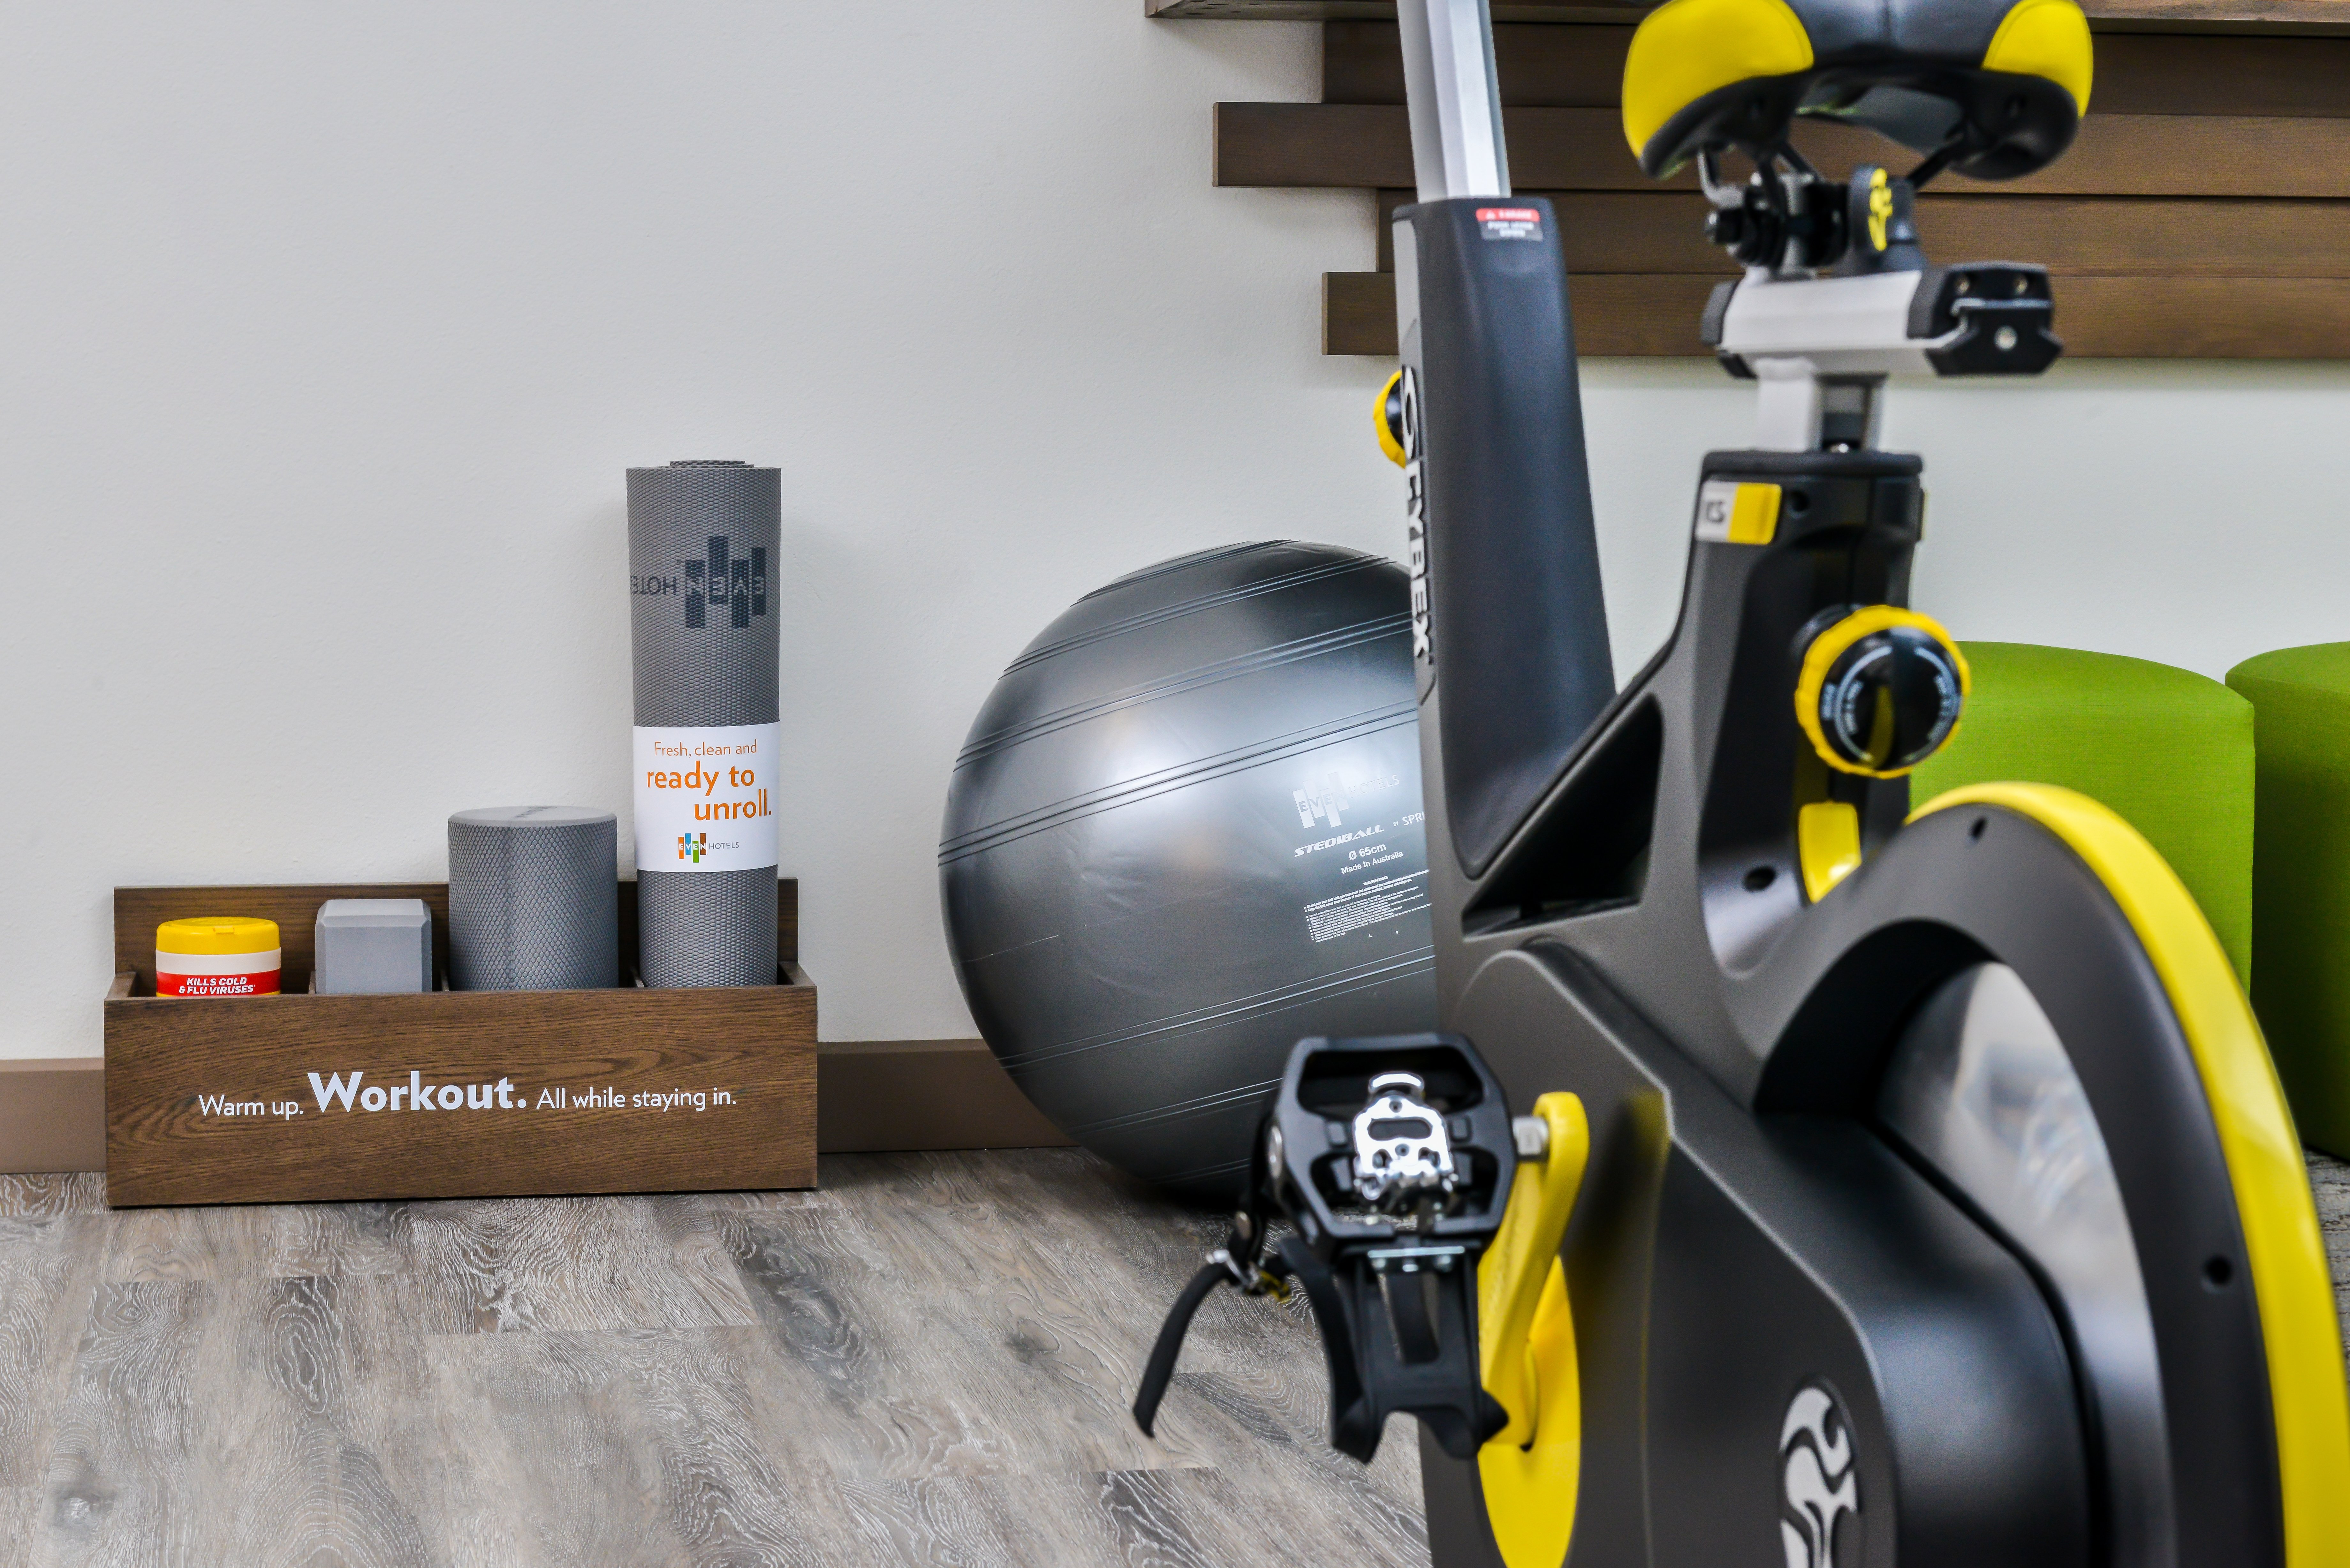 Keep moving with your choice of in-room fitness experience.